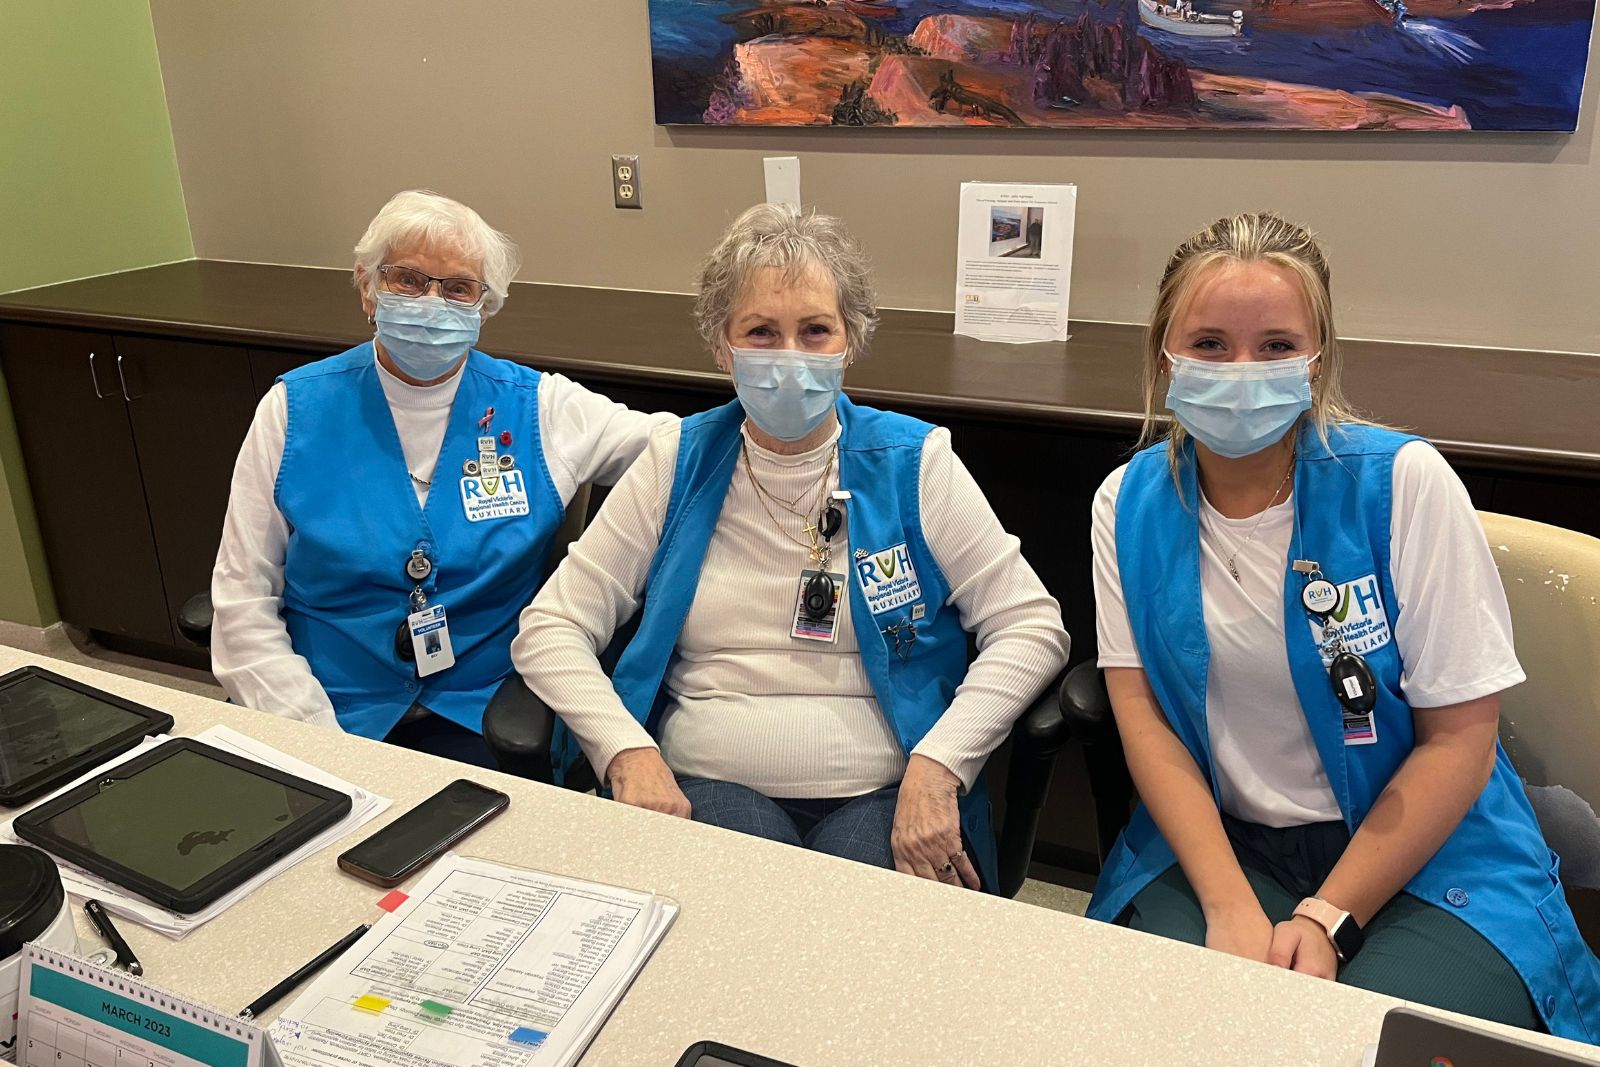 On Monday afternoons, you’ll find Dianne (middle) welcoming patients with a friendly face at the Simcoe Muskoka Regional Cancer Centre at RVH with fellow volunteers Bev (on the left) and Olivia (on the right).